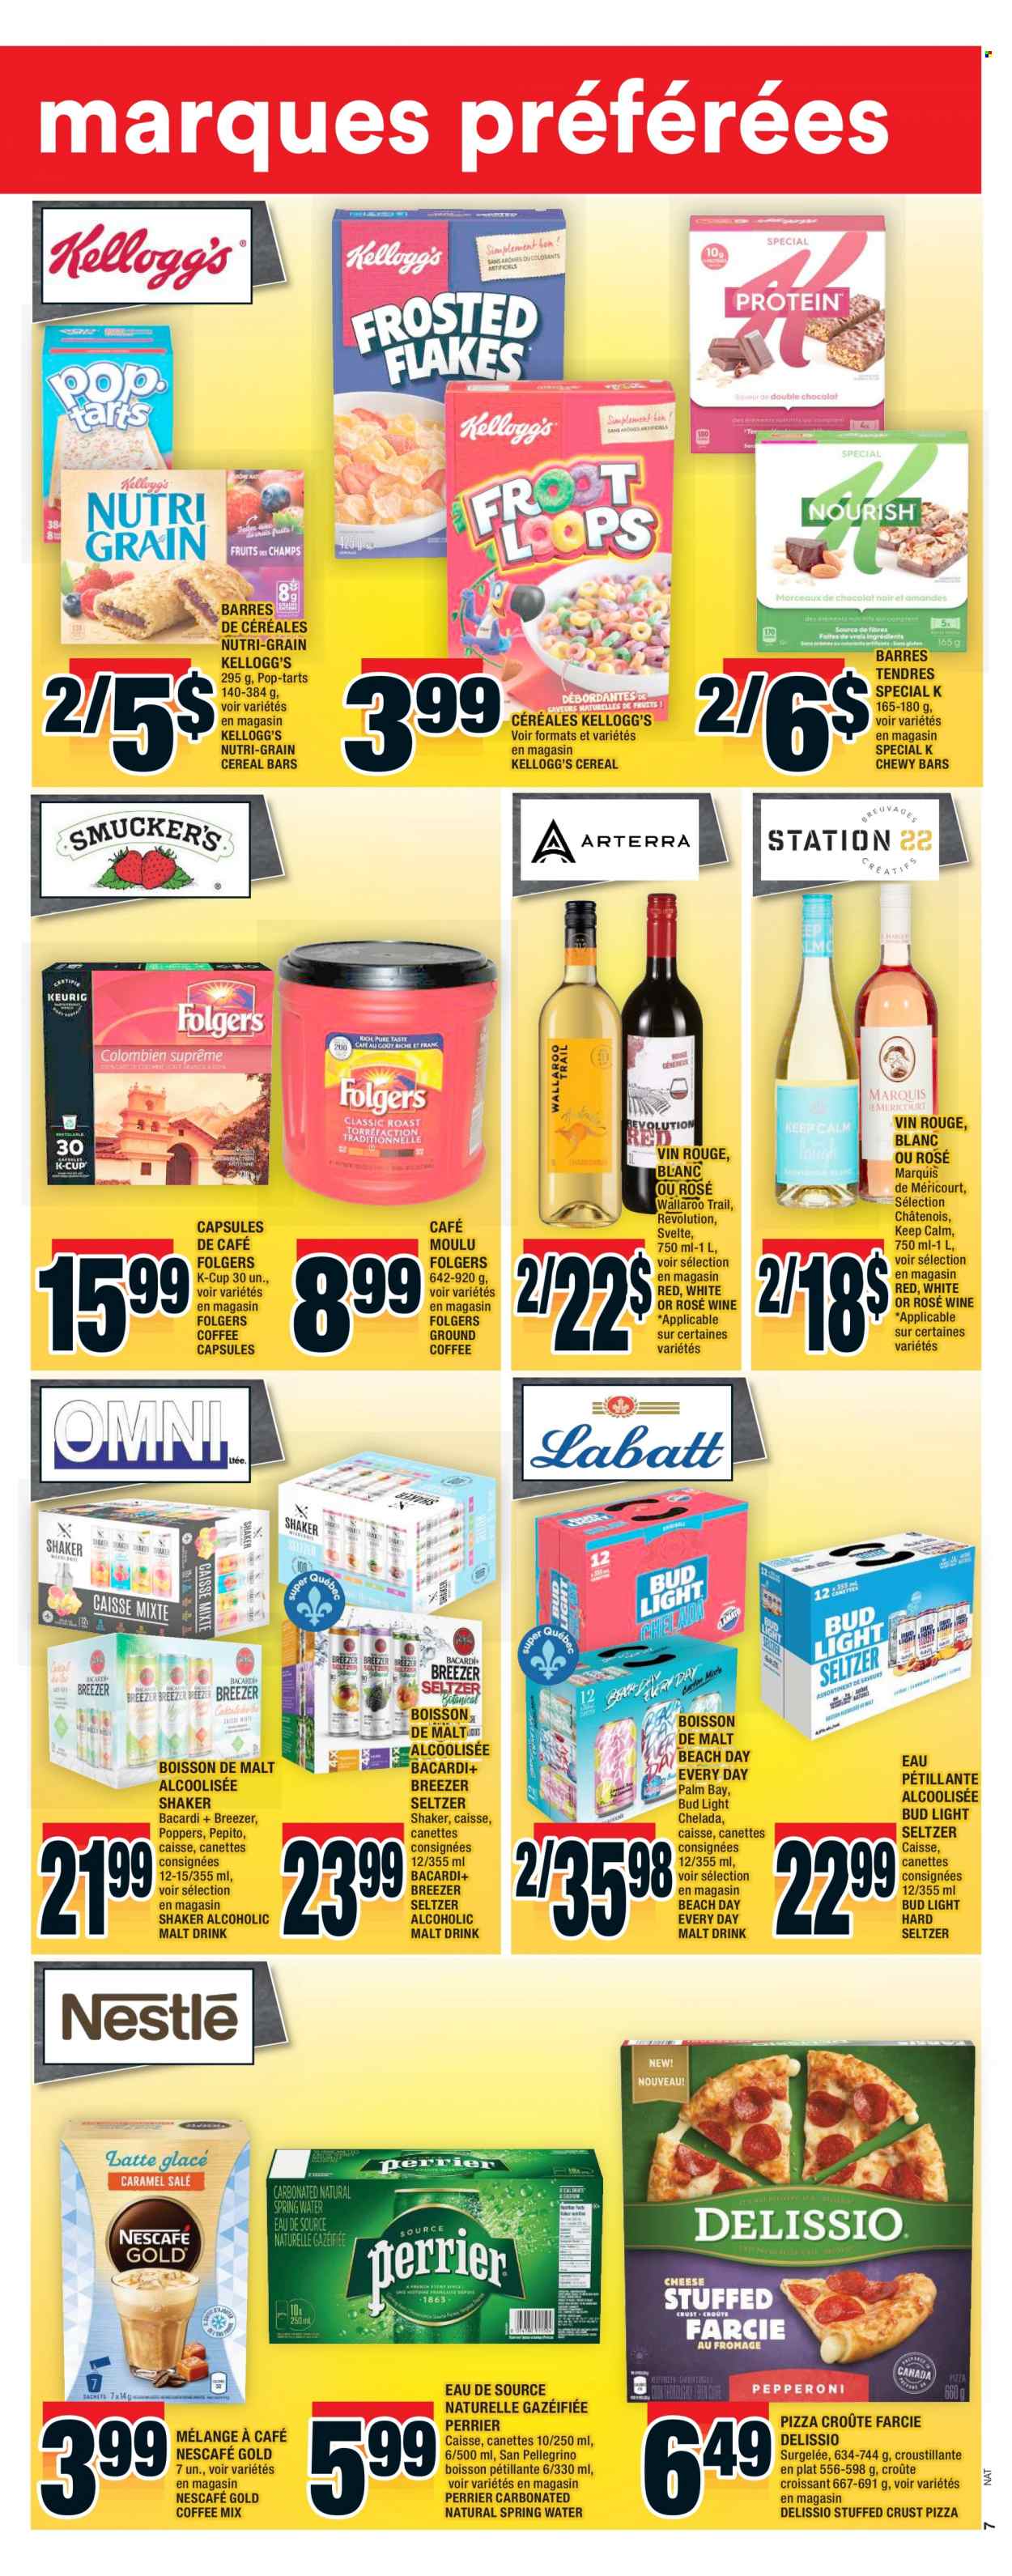 thumbnail - Super C Flyer - May 12, 2022 - May 18, 2022 - Sales products - croissant, pizza, cereal bar, Kellogg's, Pop-Tarts, malt, cereals, Nutri-Grain, Perrier, spring water, San Pellegrino, coffee, Folgers, ground coffee, coffee capsules, K-Cups, wine, rosé wine, Bacardi, Hard Seltzer, beer, Bud Light, Nescafé. Page 8.